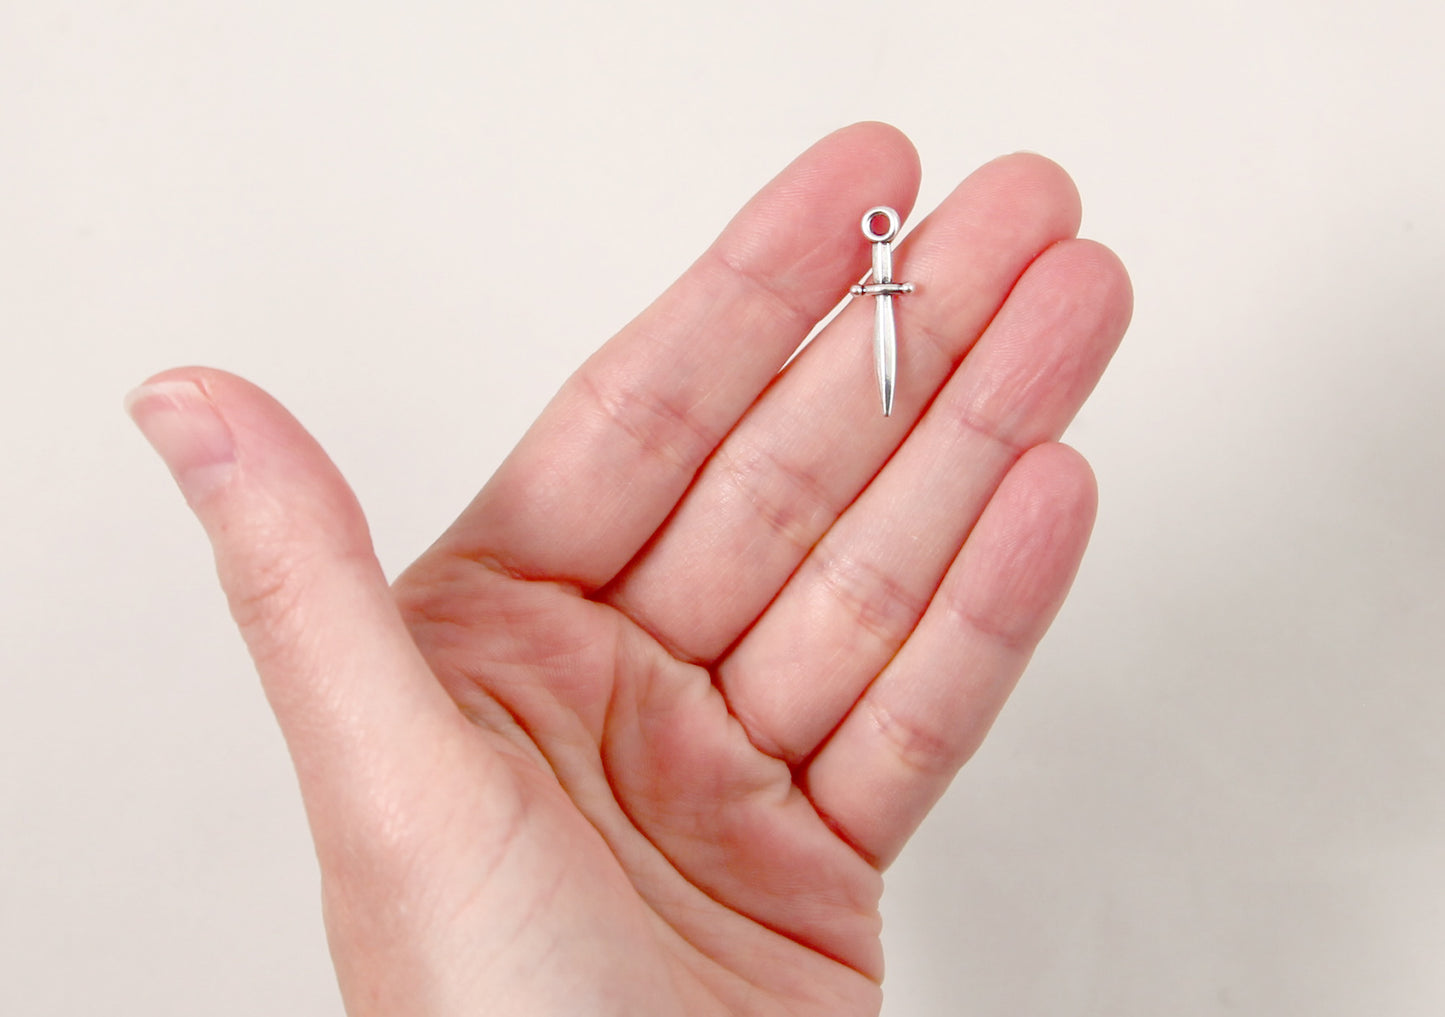 Tiny Sword Charms - 20 pc set - 23mm Metal Sword Dagger or Knife Charm - Easy to Make into Earrings